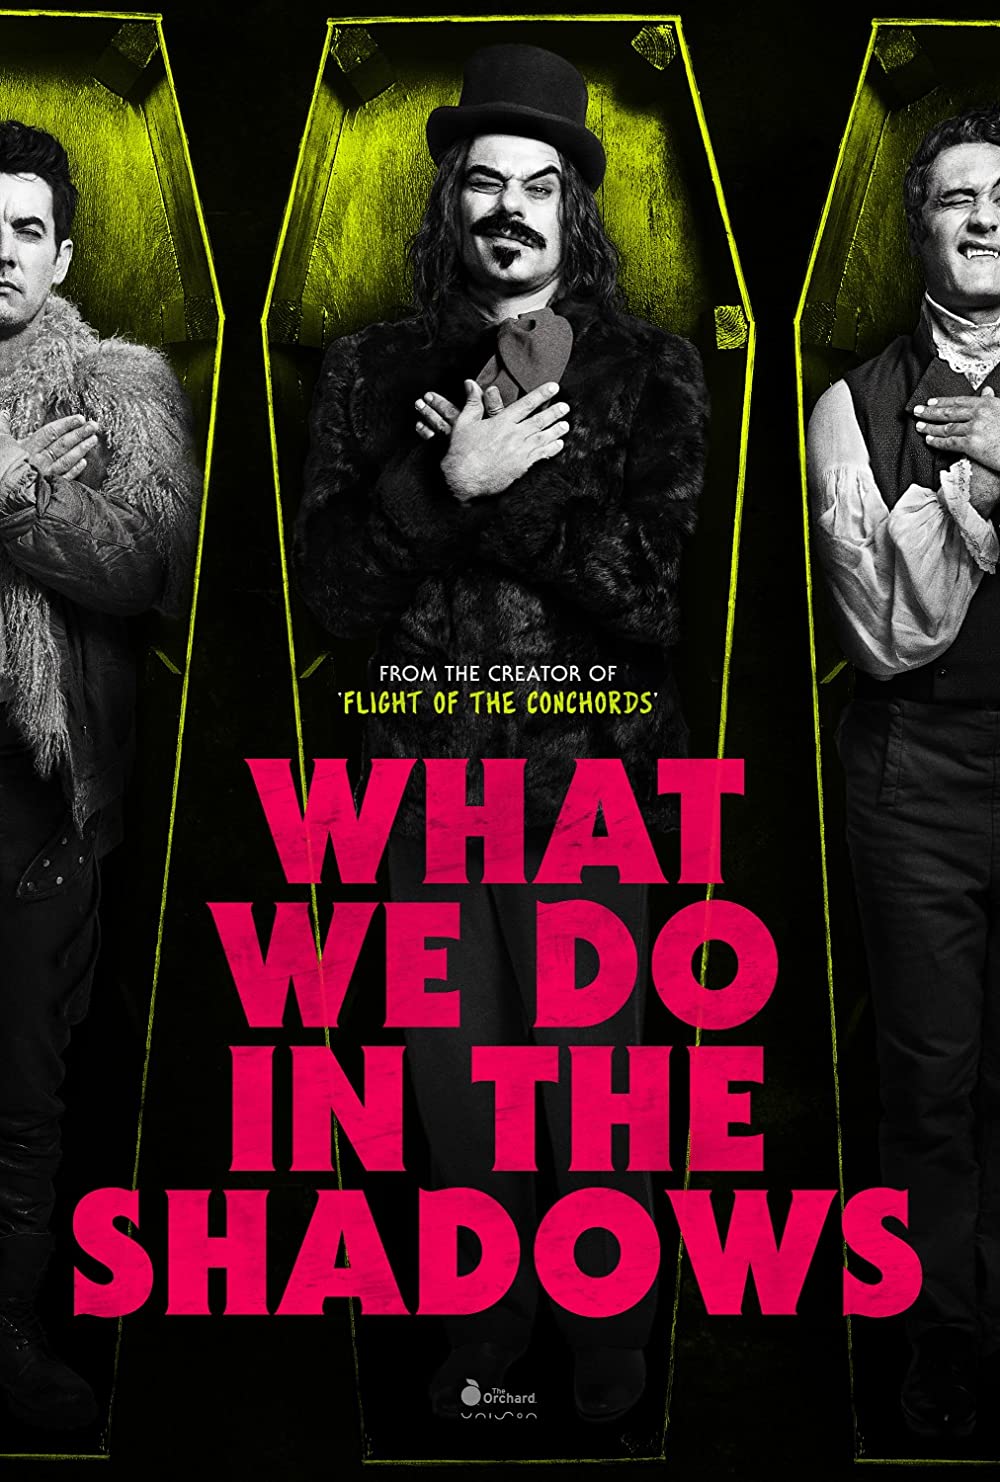 Vampire: The Masquerade & What We Do In the Shadows